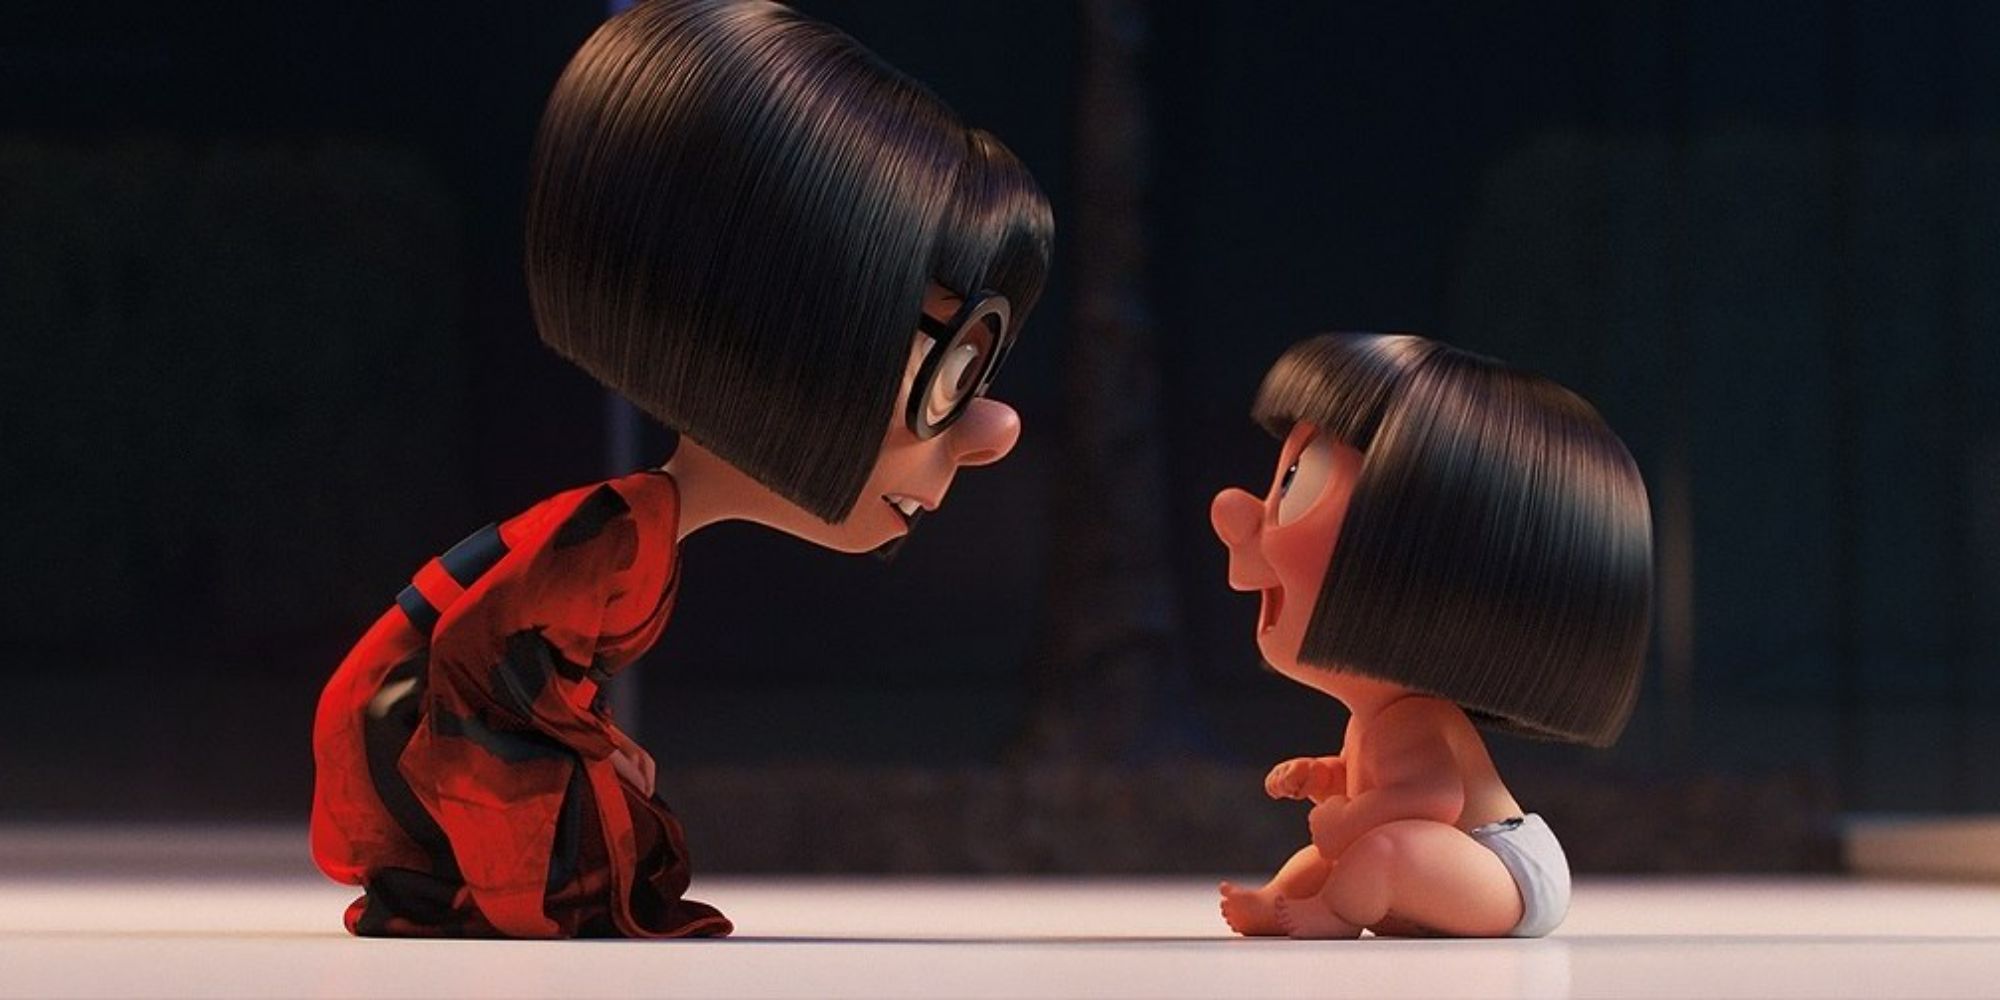 Edna and Jack Jack in Incredibles 2